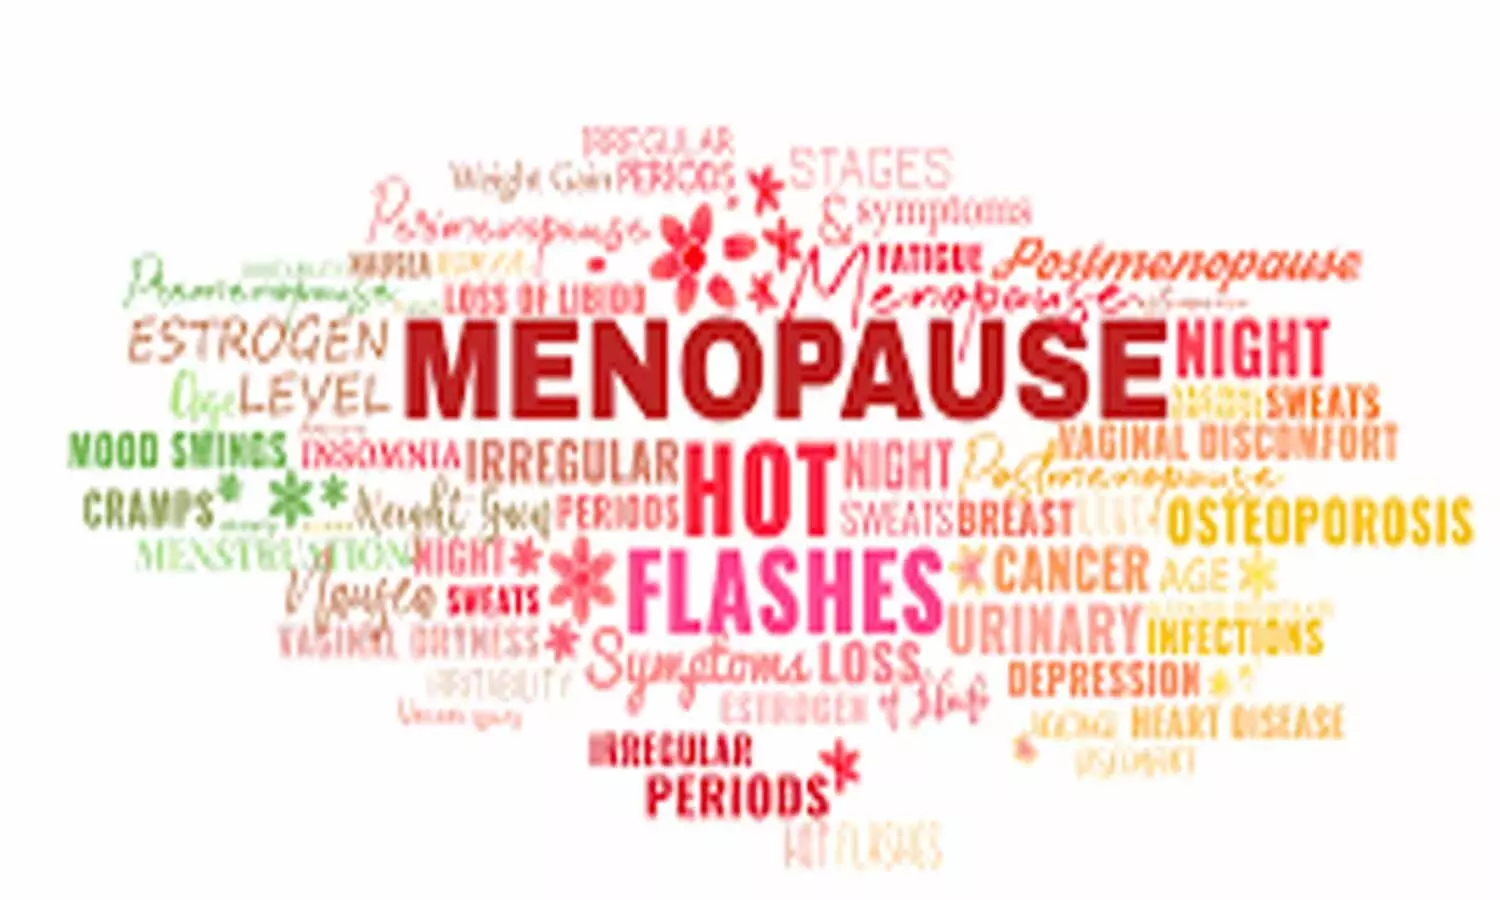 How premature menopause increases risk of cardiovascular disease, reveals study